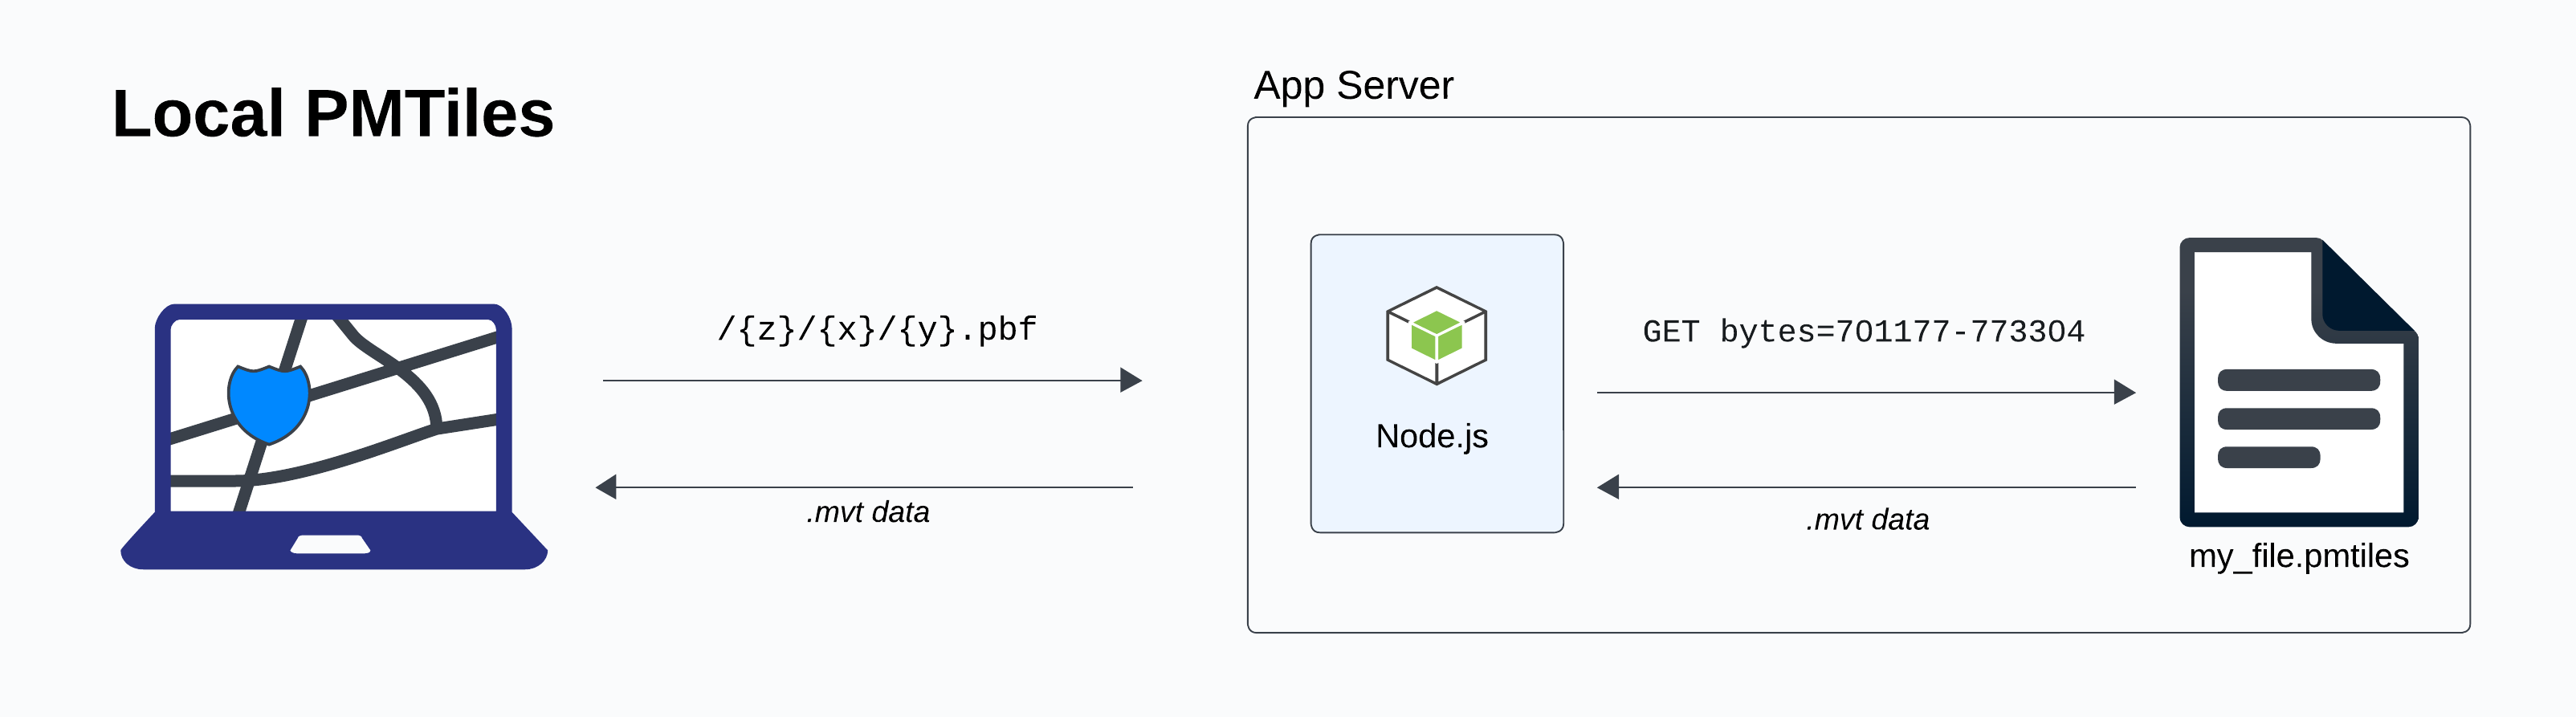 Architecture diagram for serving PMTiles from a NodeJS server.